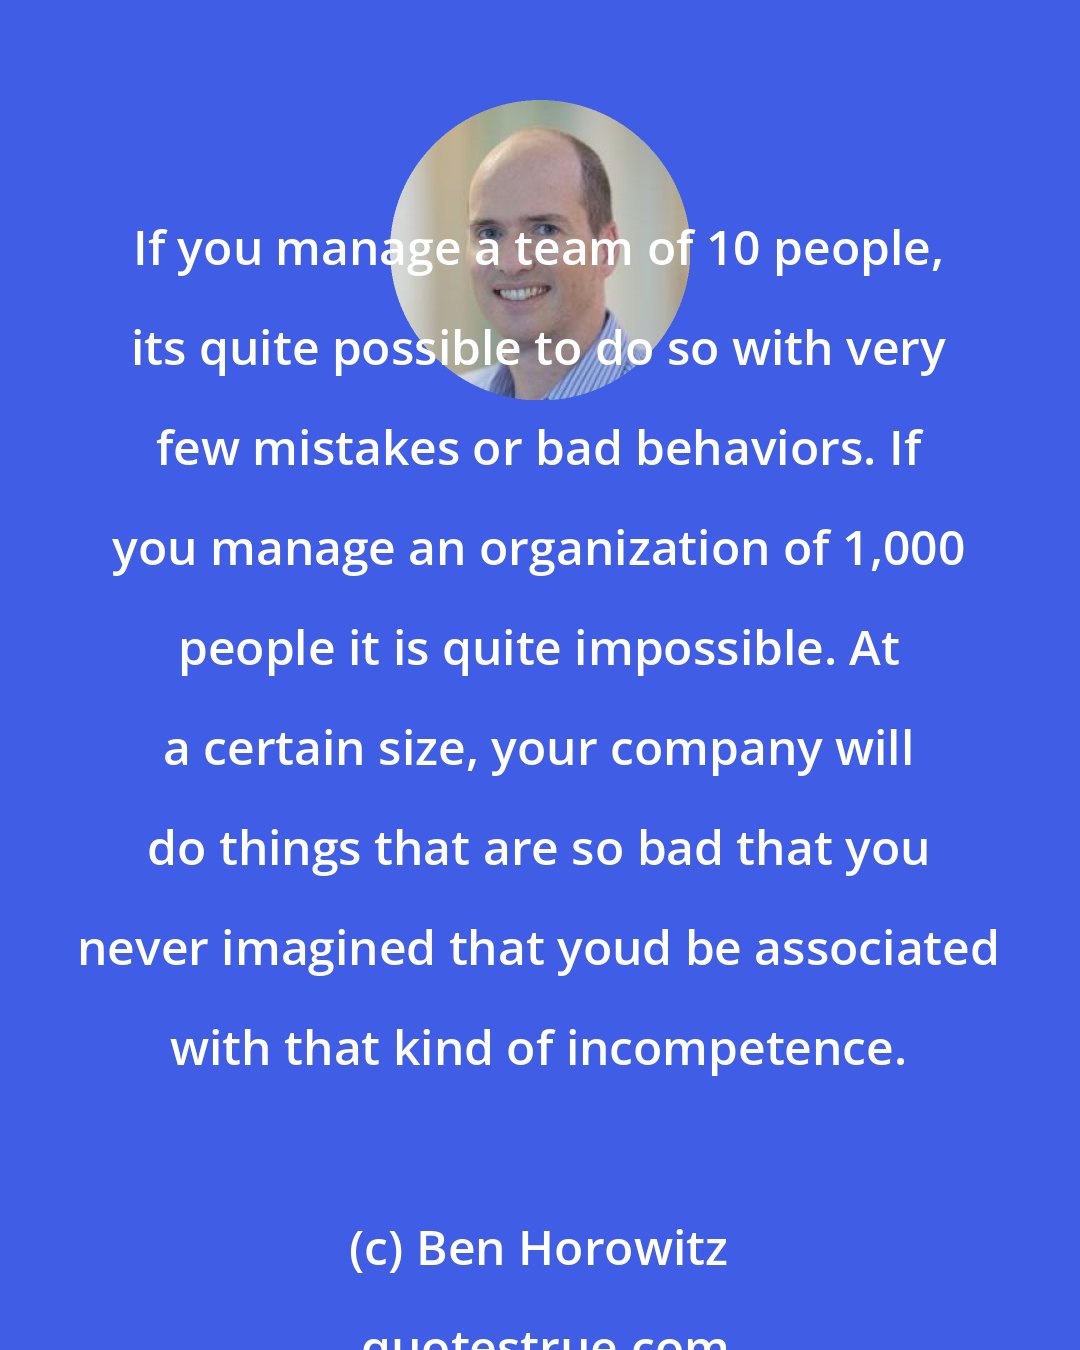 Ben Horowitz: If you manage a team of 10 people, its quite possible to do so with very few mistakes or bad behaviors. If you manage an organization of 1,000 people it is quite impossible. At a certain size, your company will do things that are so bad that you never imagined that youd be associated with that kind of incompetence.